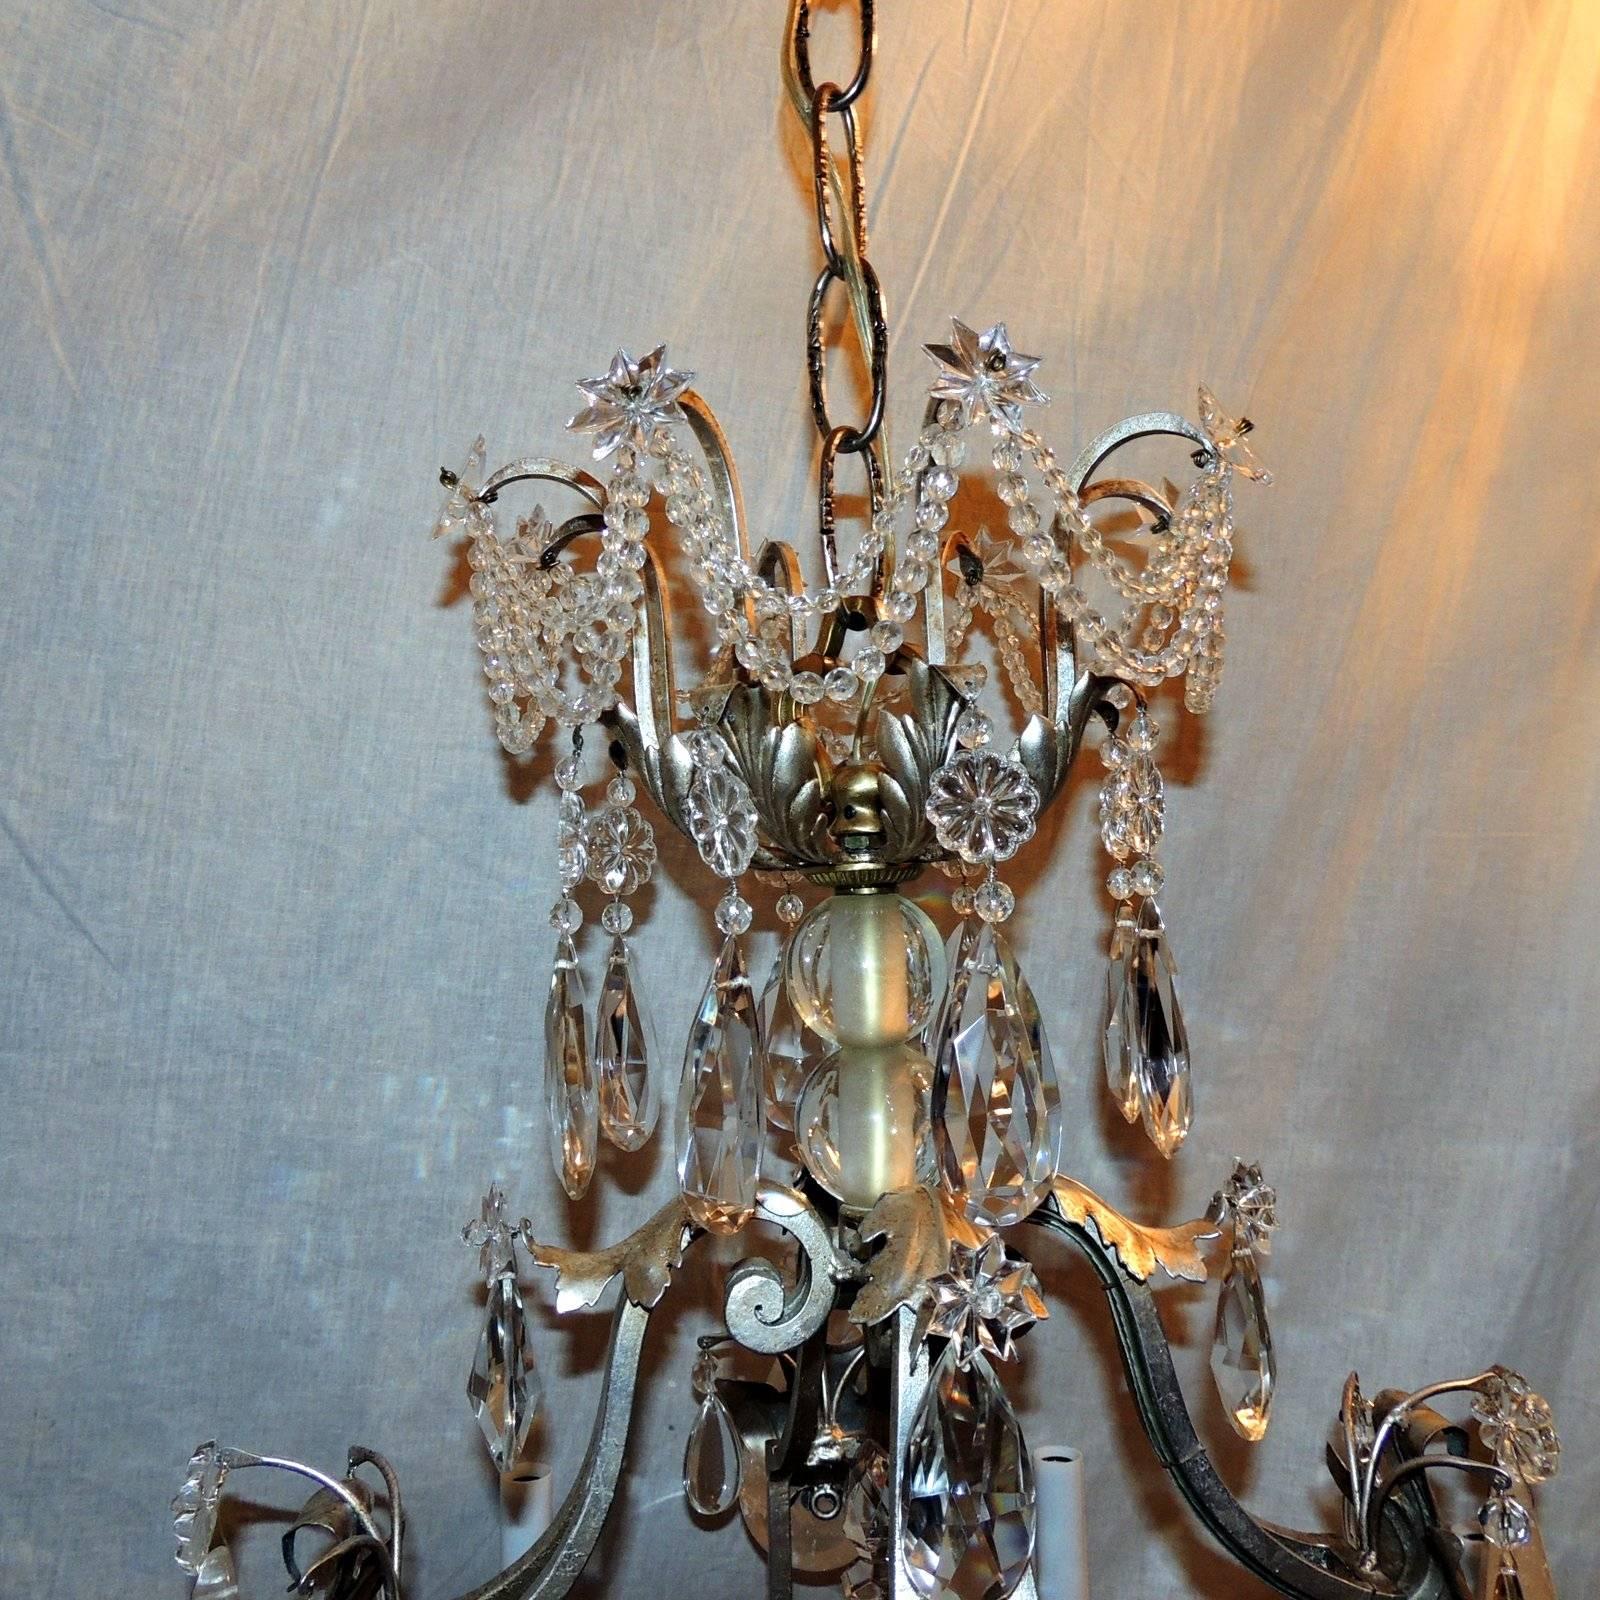 French Fine Transitional Pagoda Bagues Jansen Eight-Light Gilt Rock Crystal Chandelier For Sale